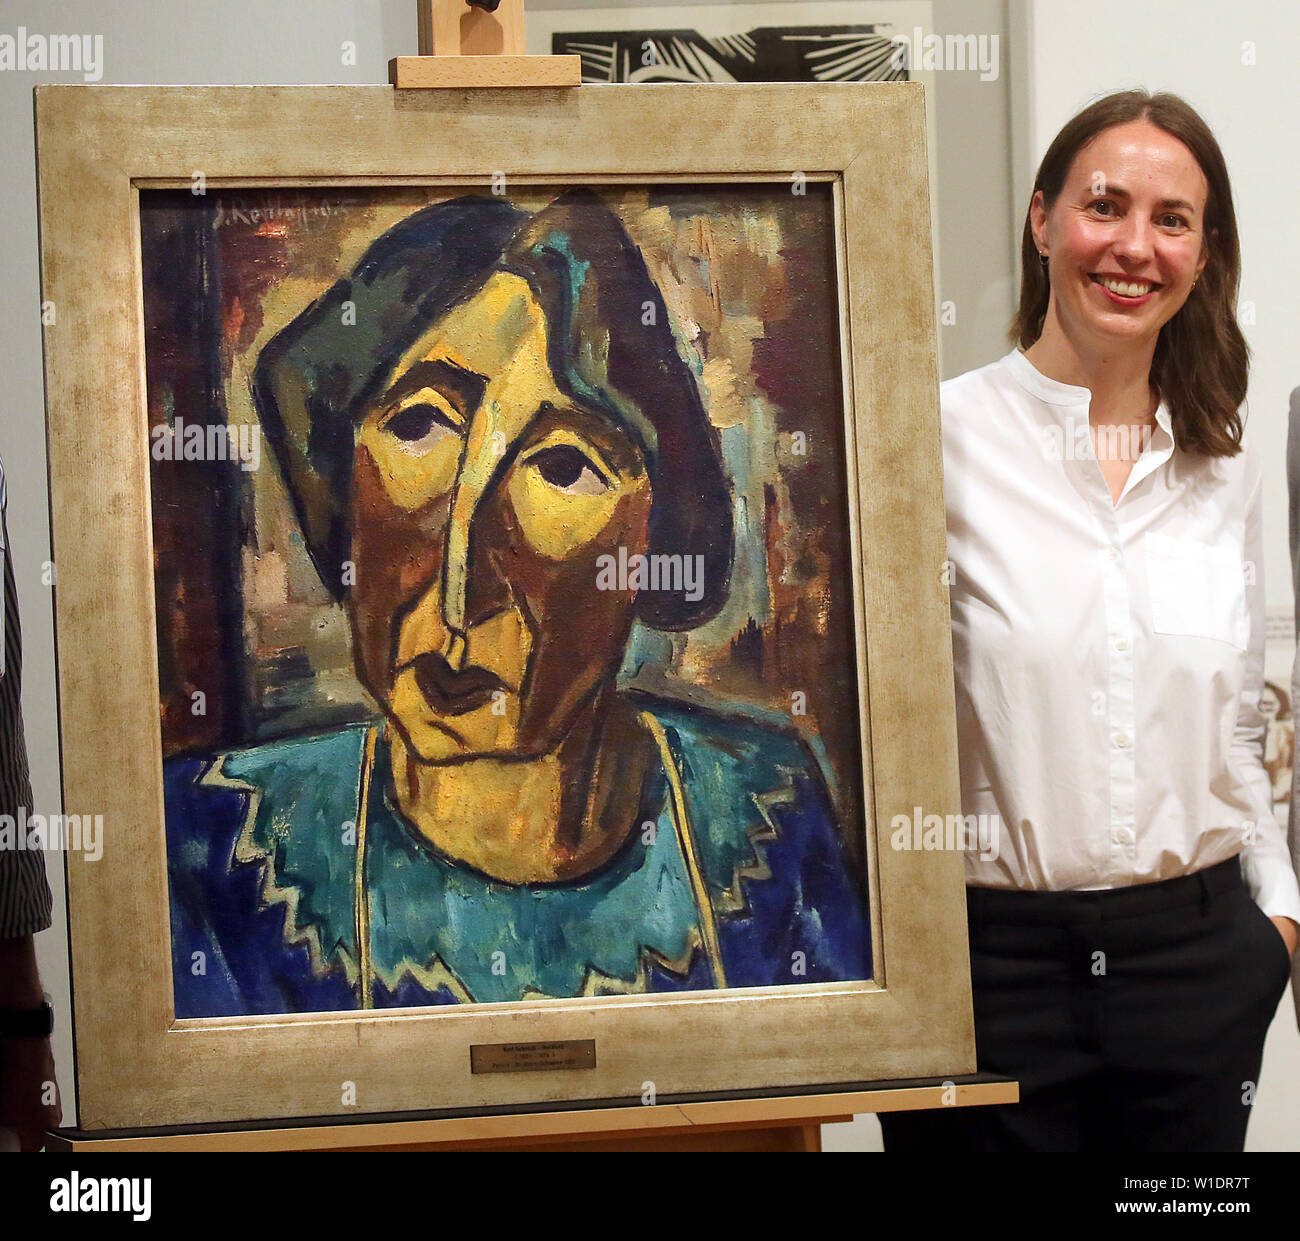 Berlin, Germany. 02nd July, 2019. During a press conference Lisa Marei Schmidt, director of the Brücke Museum, presents the new acquisition for the Brücke Museum, the important painting 'Bildnis R.S. (Rosa Schapire)' by Karl Schmidt-Rottluff. Credit: Wolfgang Kumm/dpa - ATTENTION: Only for editorial use in connection with the current reporting/dpa/Alamy Live News Stock Photo